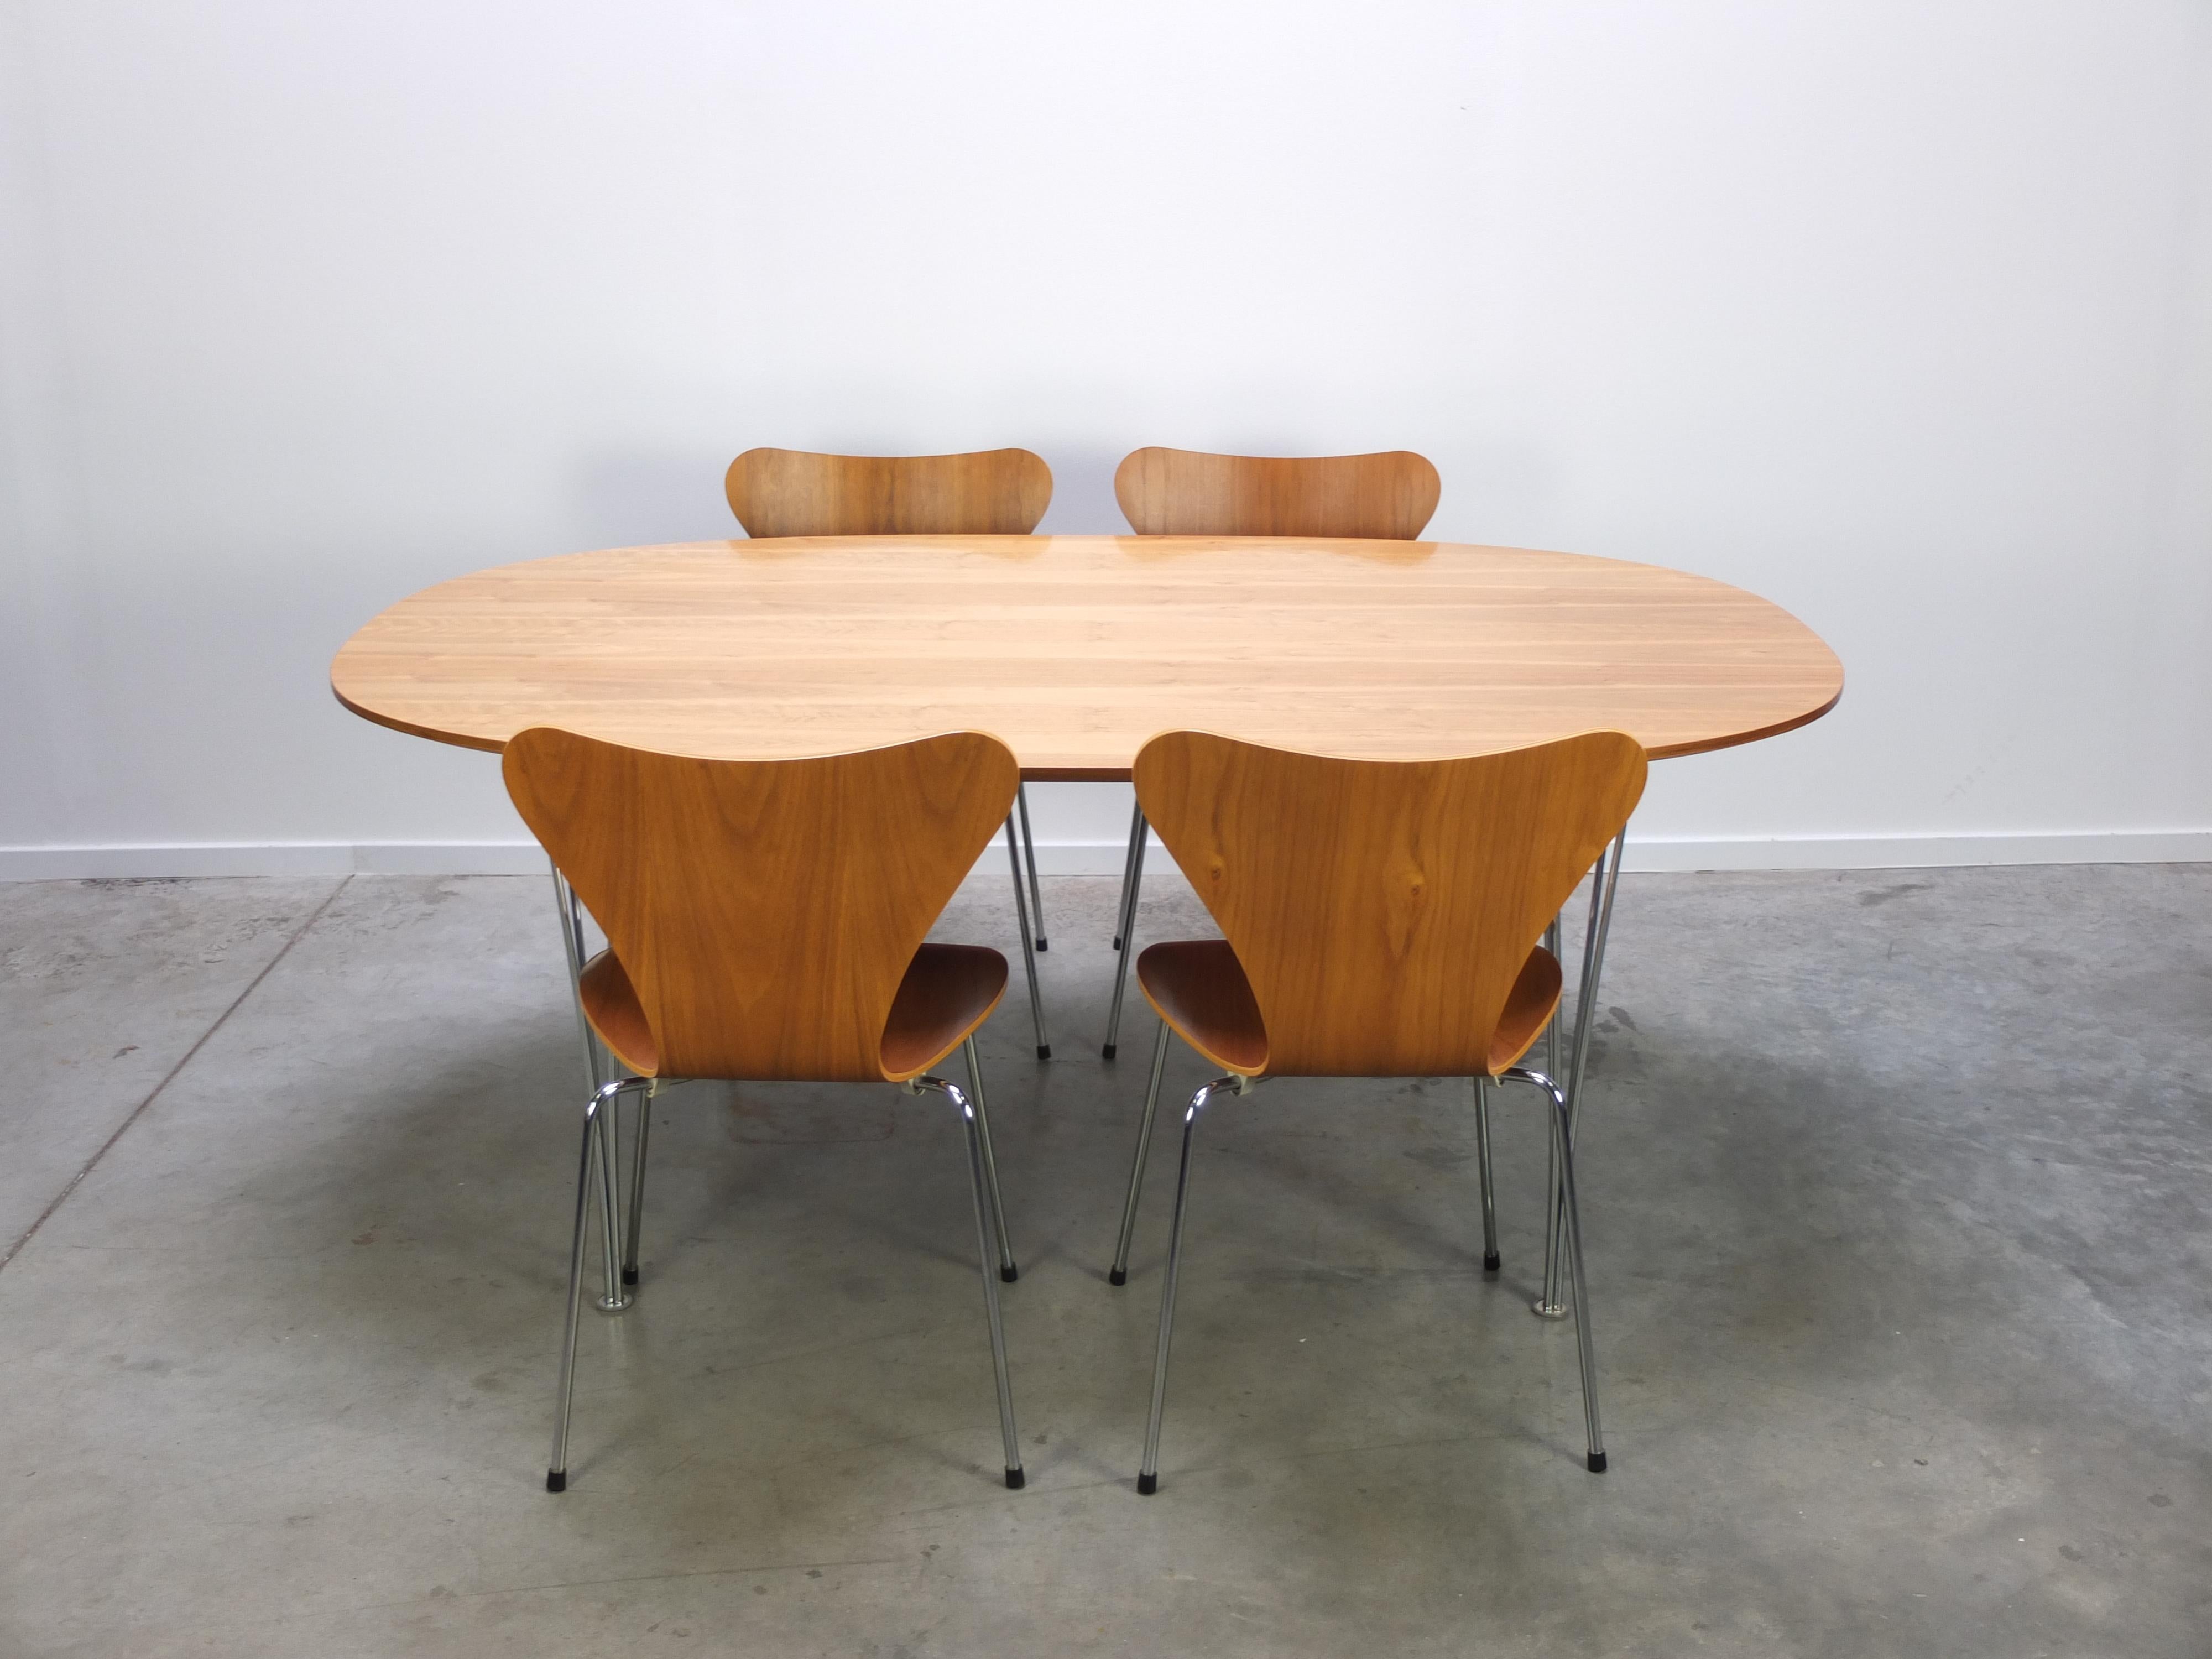 Beautiful Danish Fritz Hansen dining set in walnut: a ‘Super-Elliptical’ dining table designed by Piet Hein & Bruno Mathsson and in 2005 (labeled). This example features a beautiful top made of walnut with a magnificent wood grain, combined with the